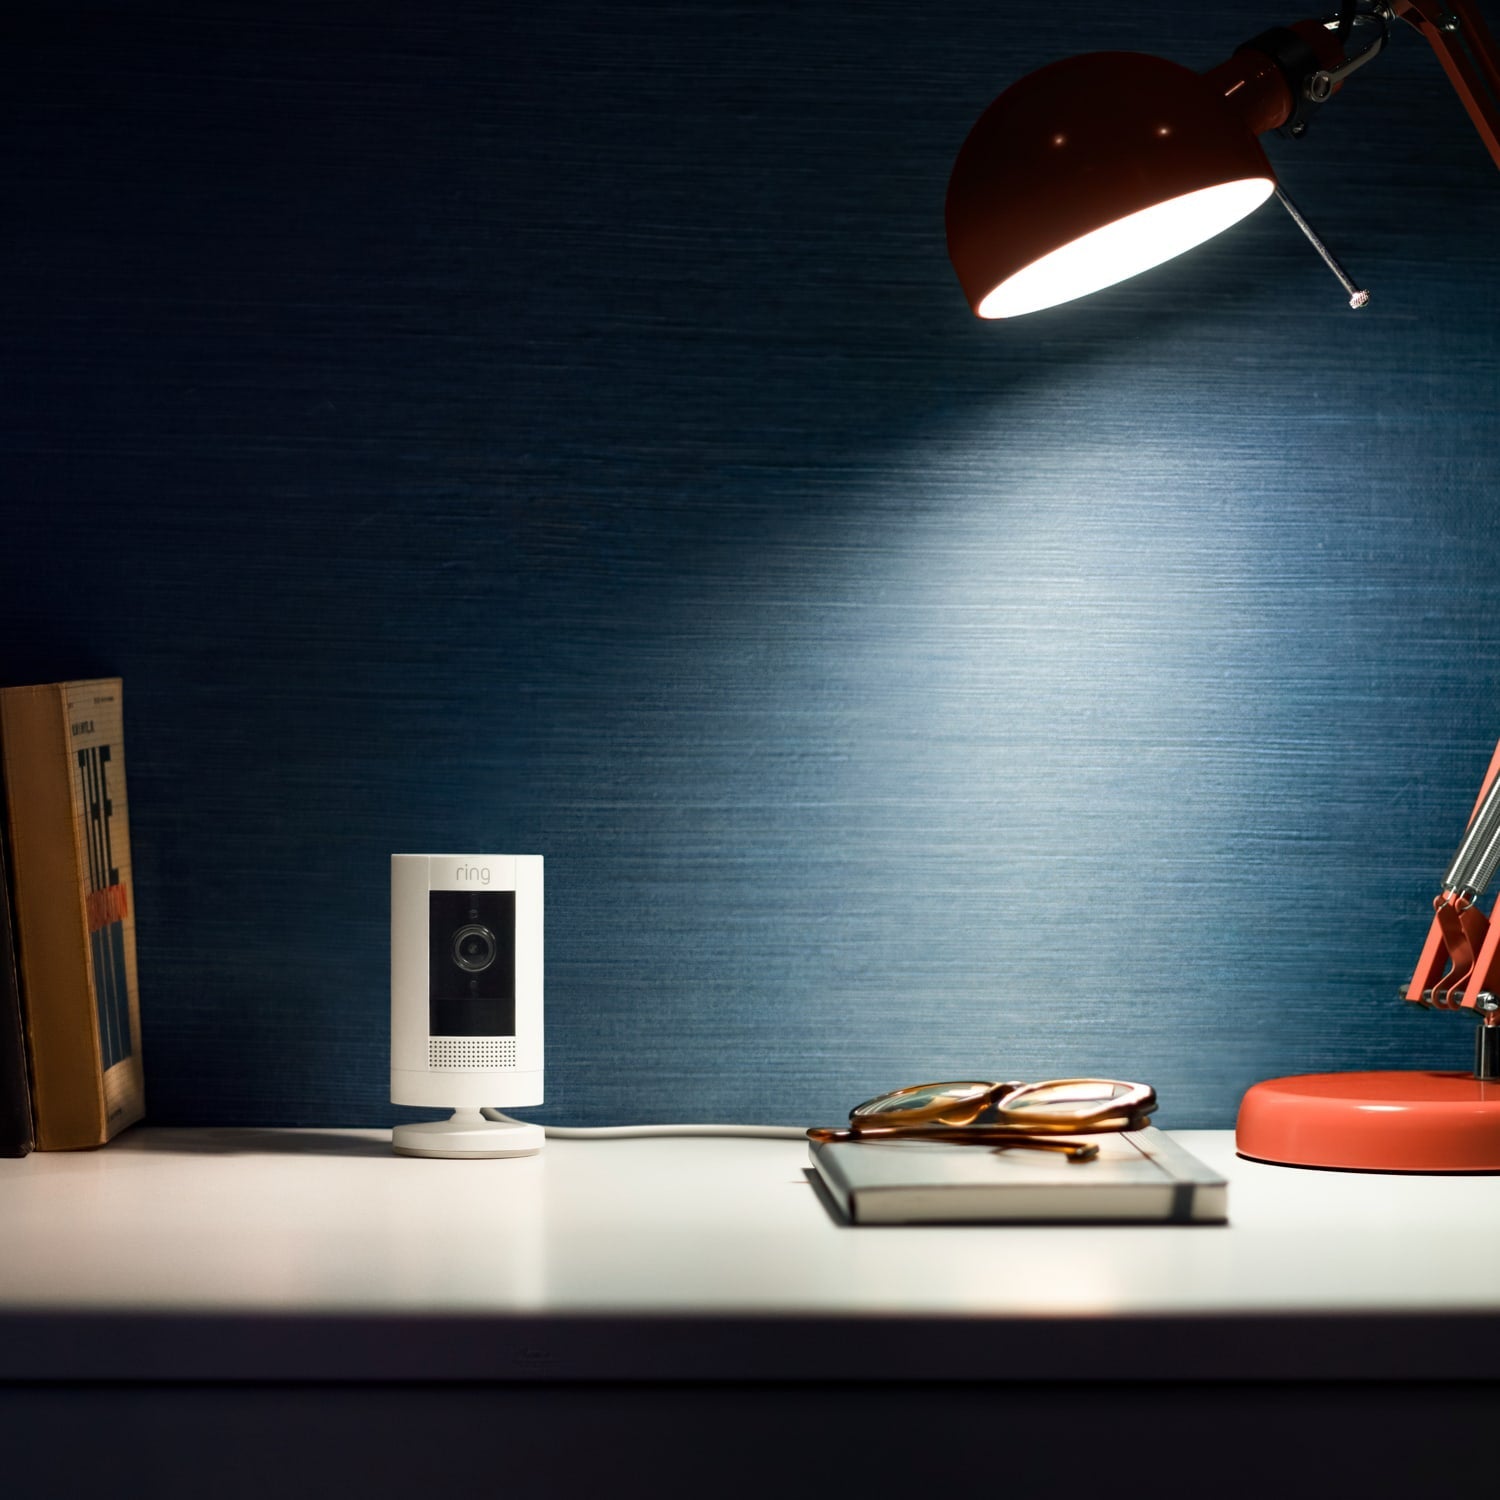 Stick Up Cam Plug-In (for Certified Refurbished) - Stick Up Cam, Plug-In model in white on a desktop next to a pair of glasses, a book, and a lamp.